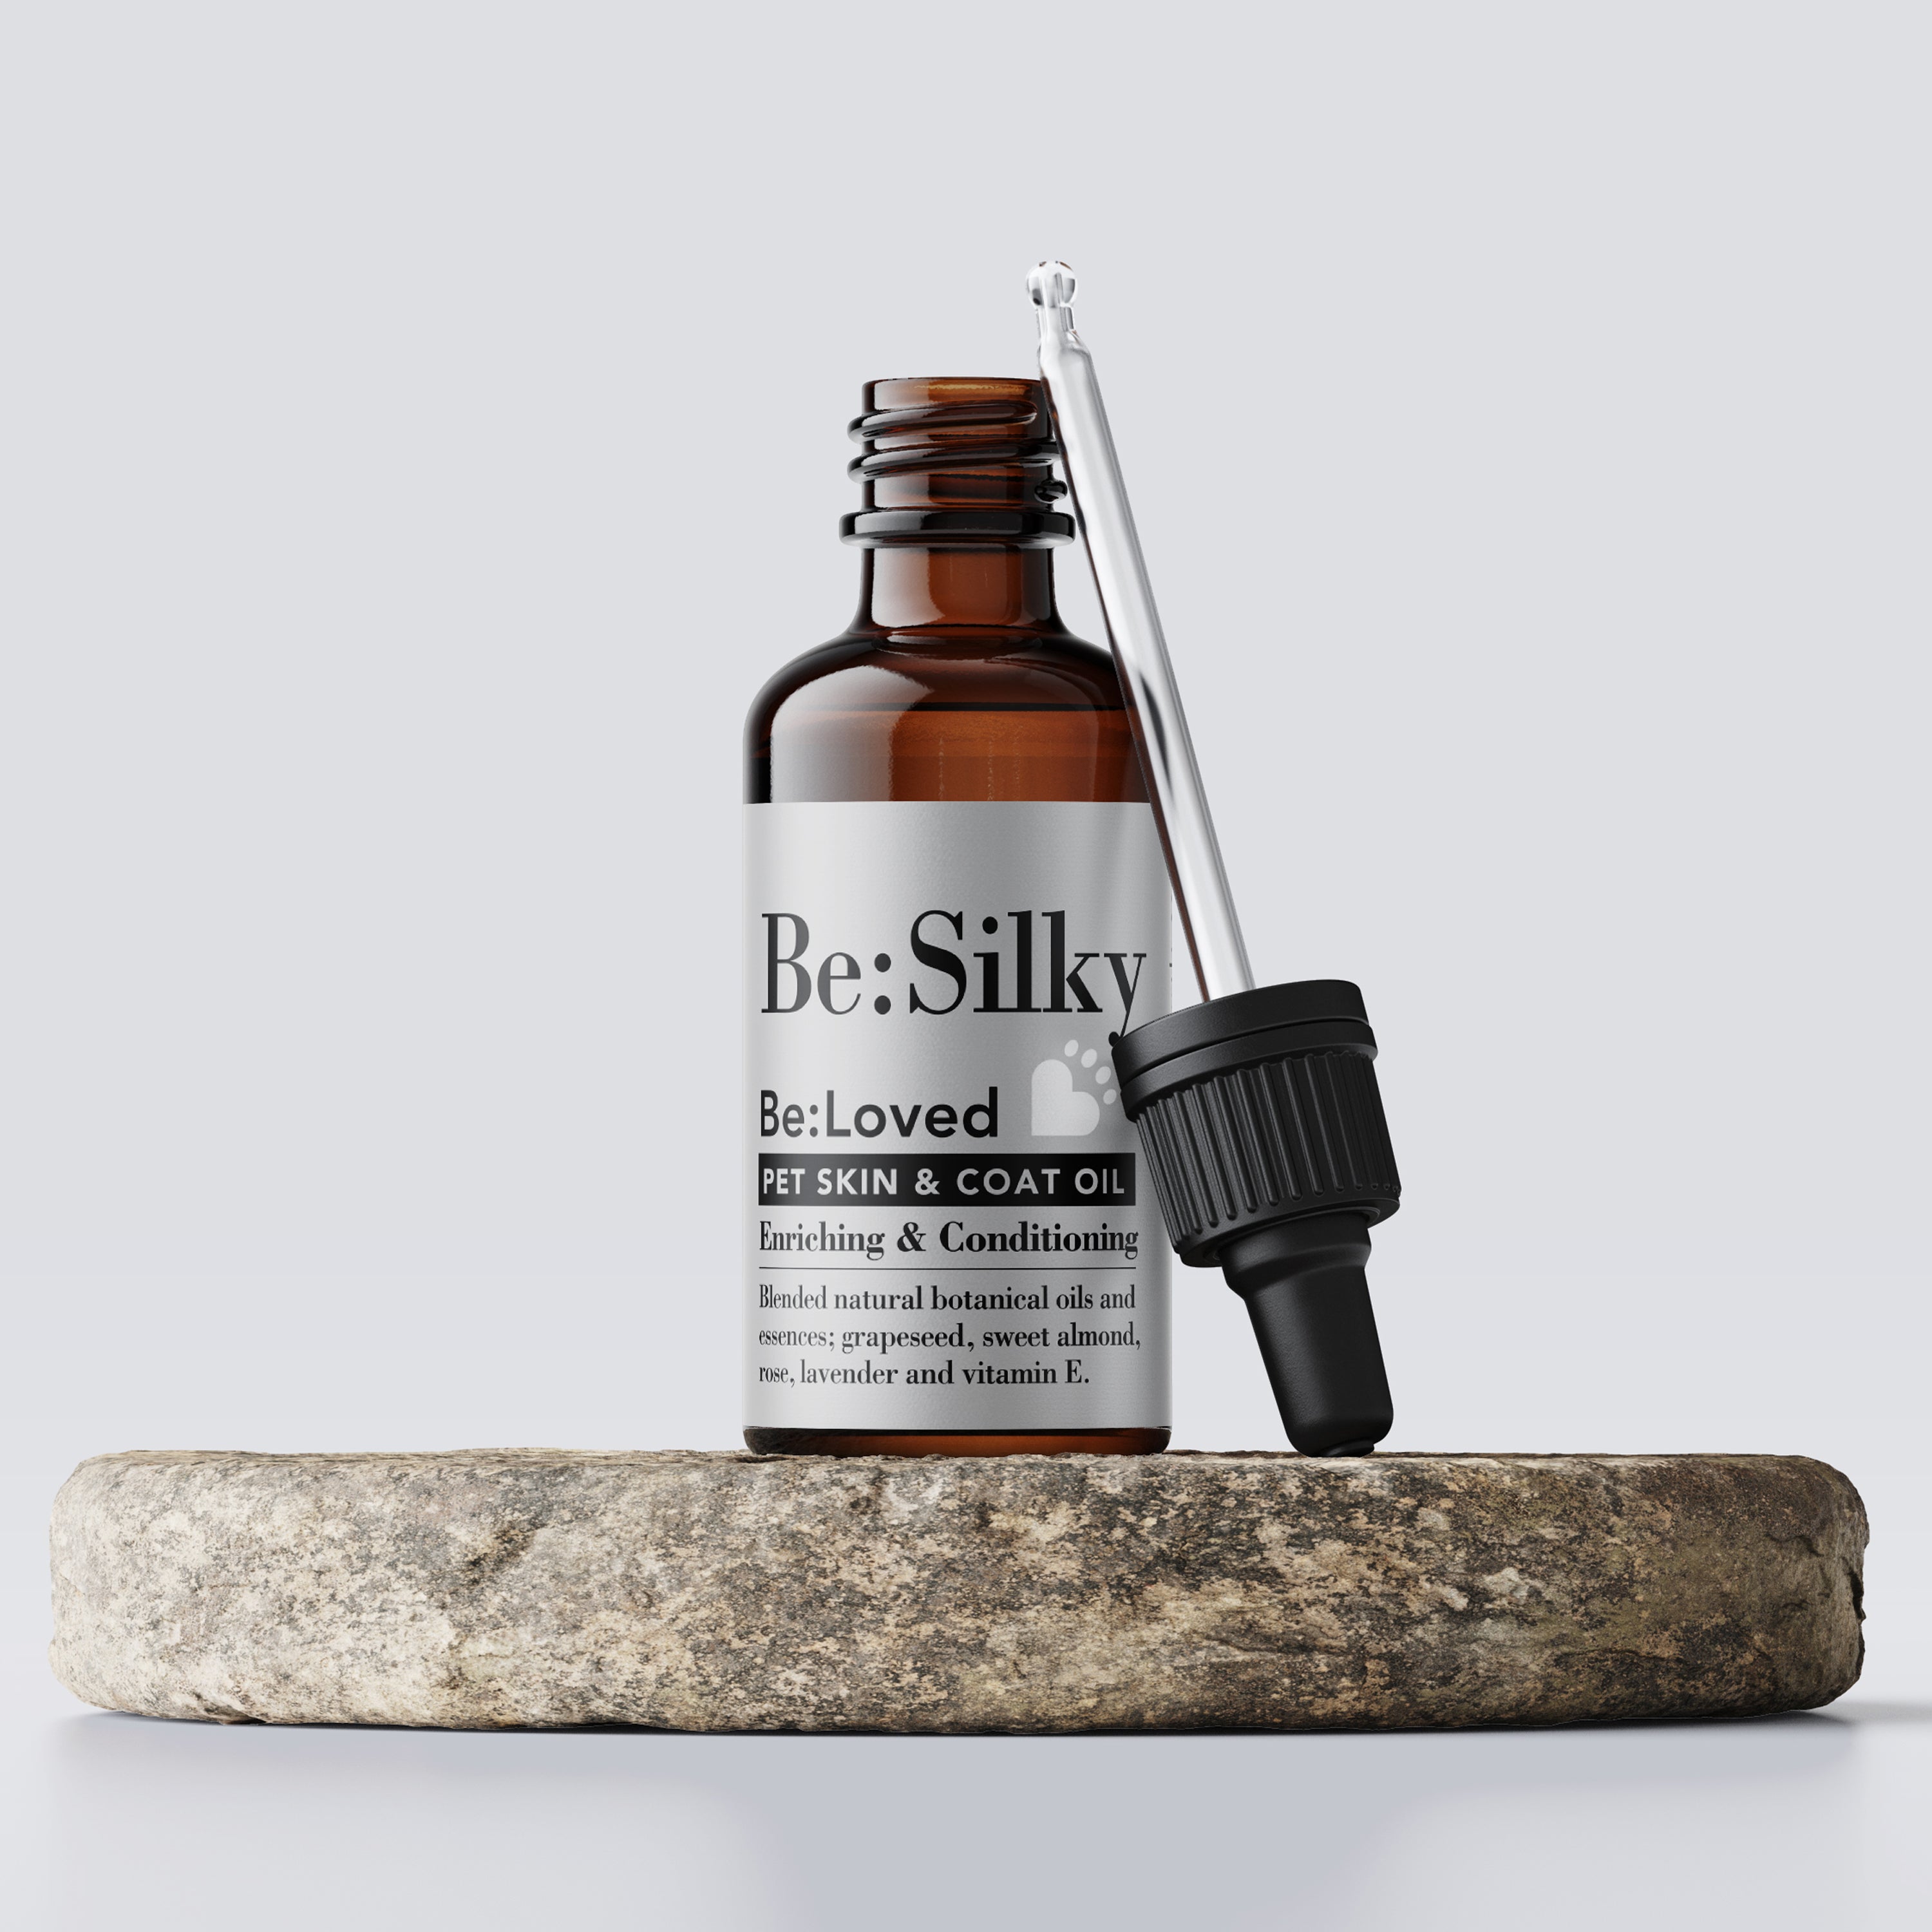 Be:silky pet skin and coat oil product in glass bottle packaging on a wooden tray.